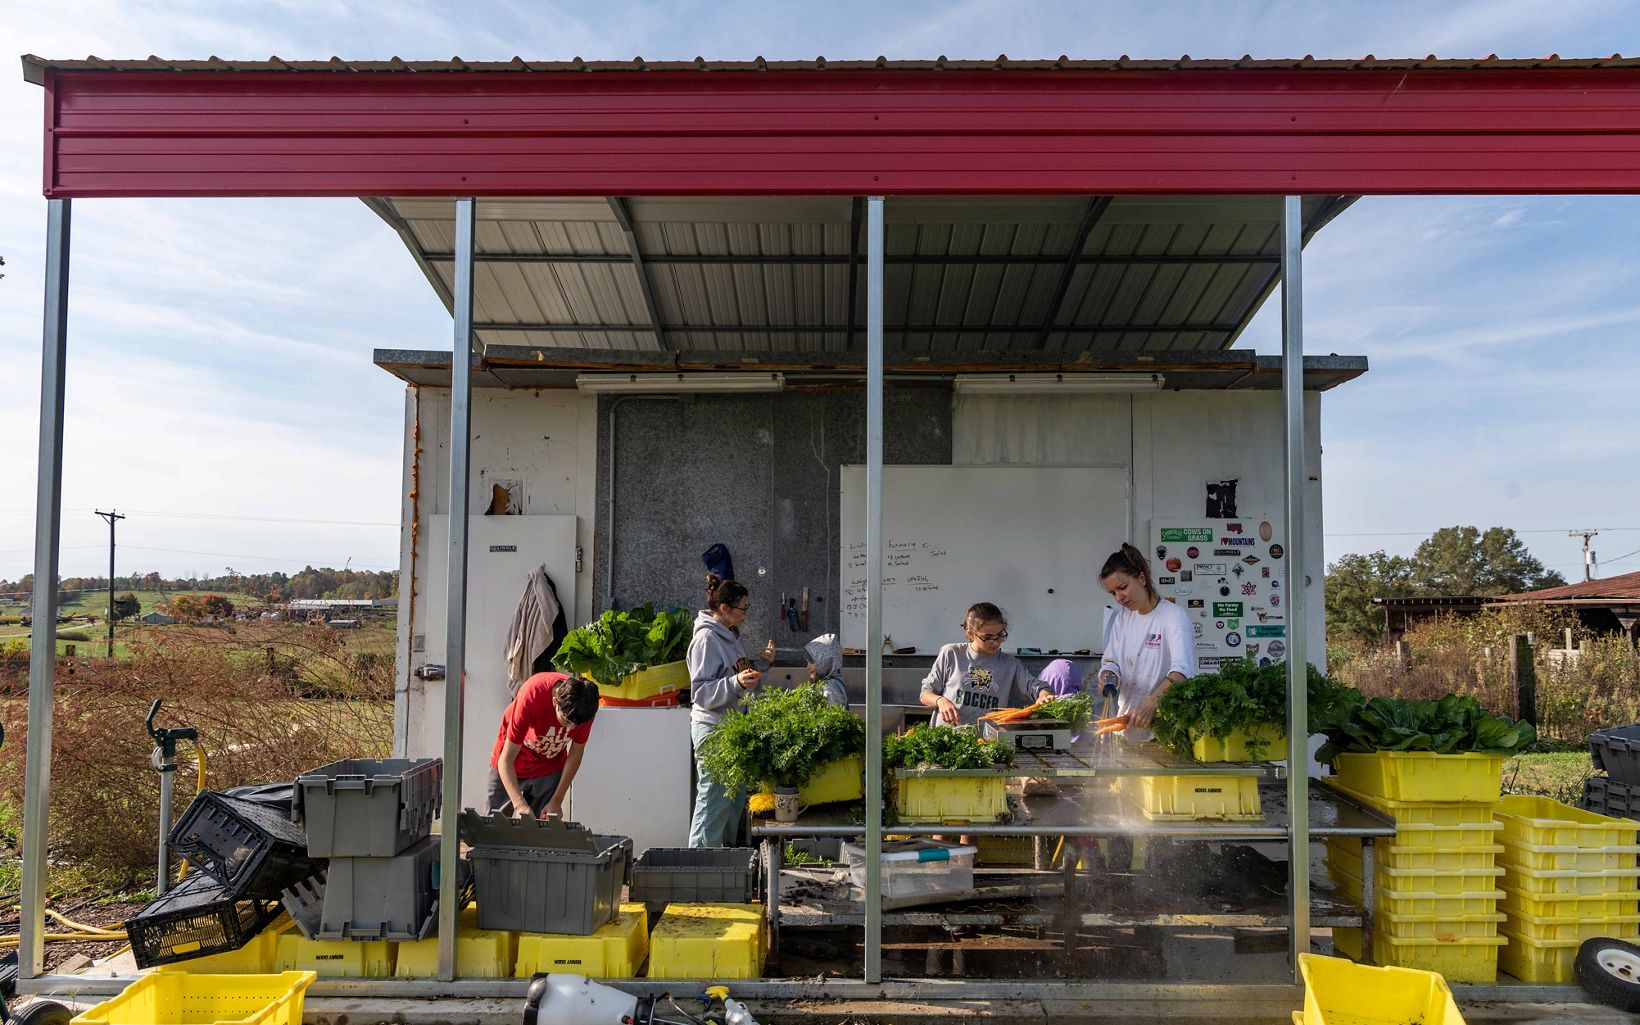 Four people stand under a small open air shelter and wash yellow crates filled with vegetables with a hose to remove dirt.